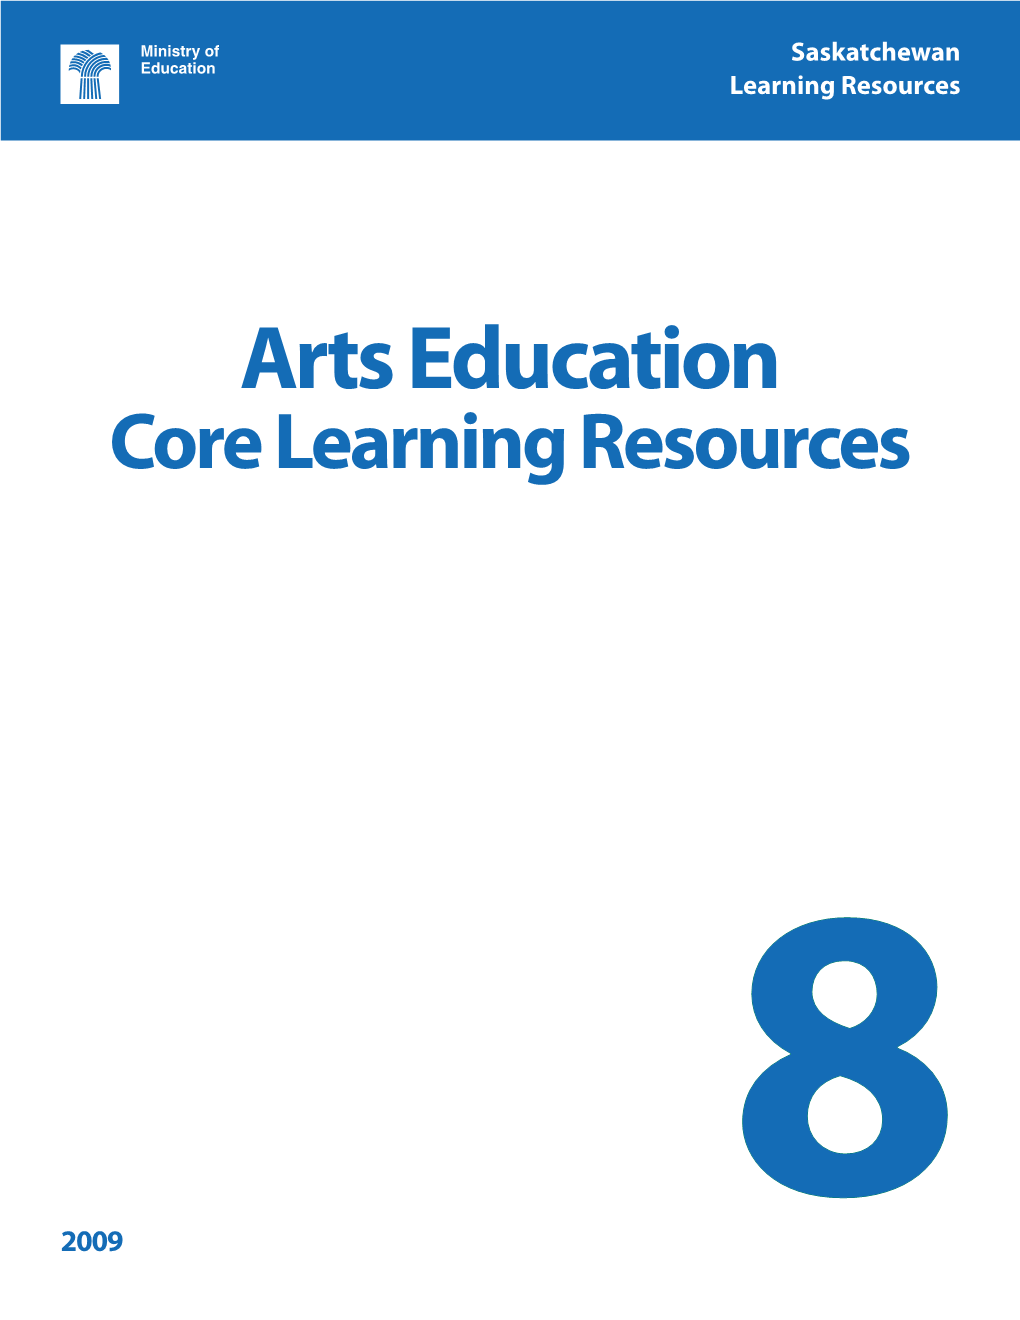 Arts Education Core Learning Resources